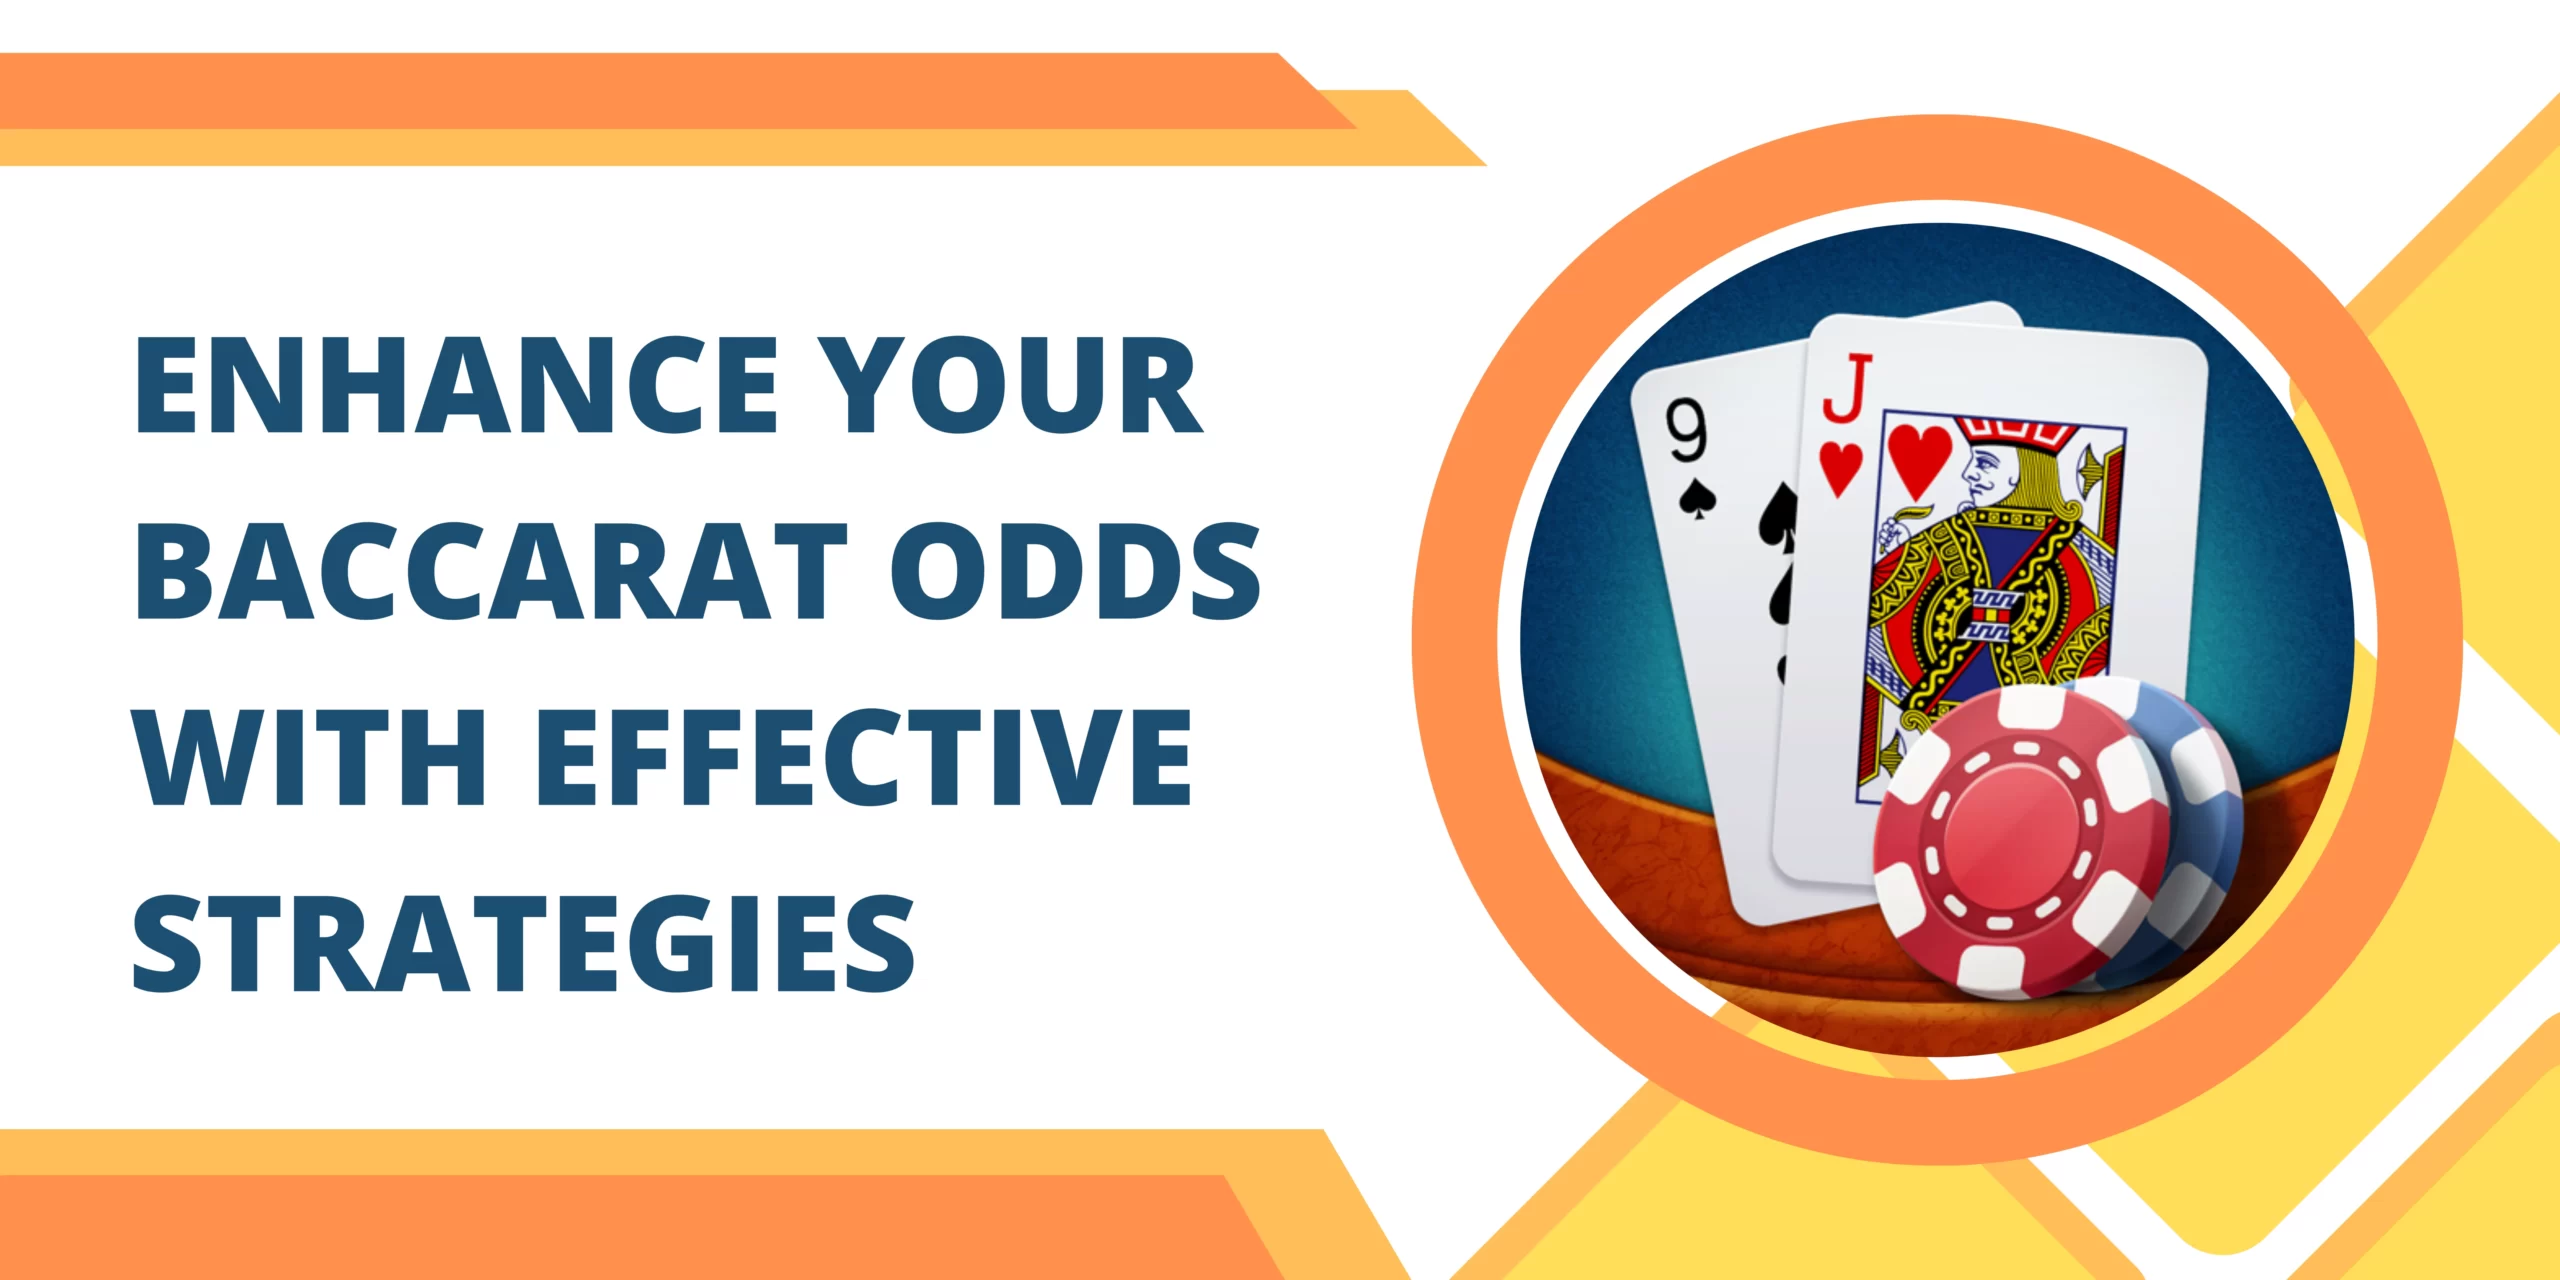 Enhance Your Baccarat Odds with Effective Strategies